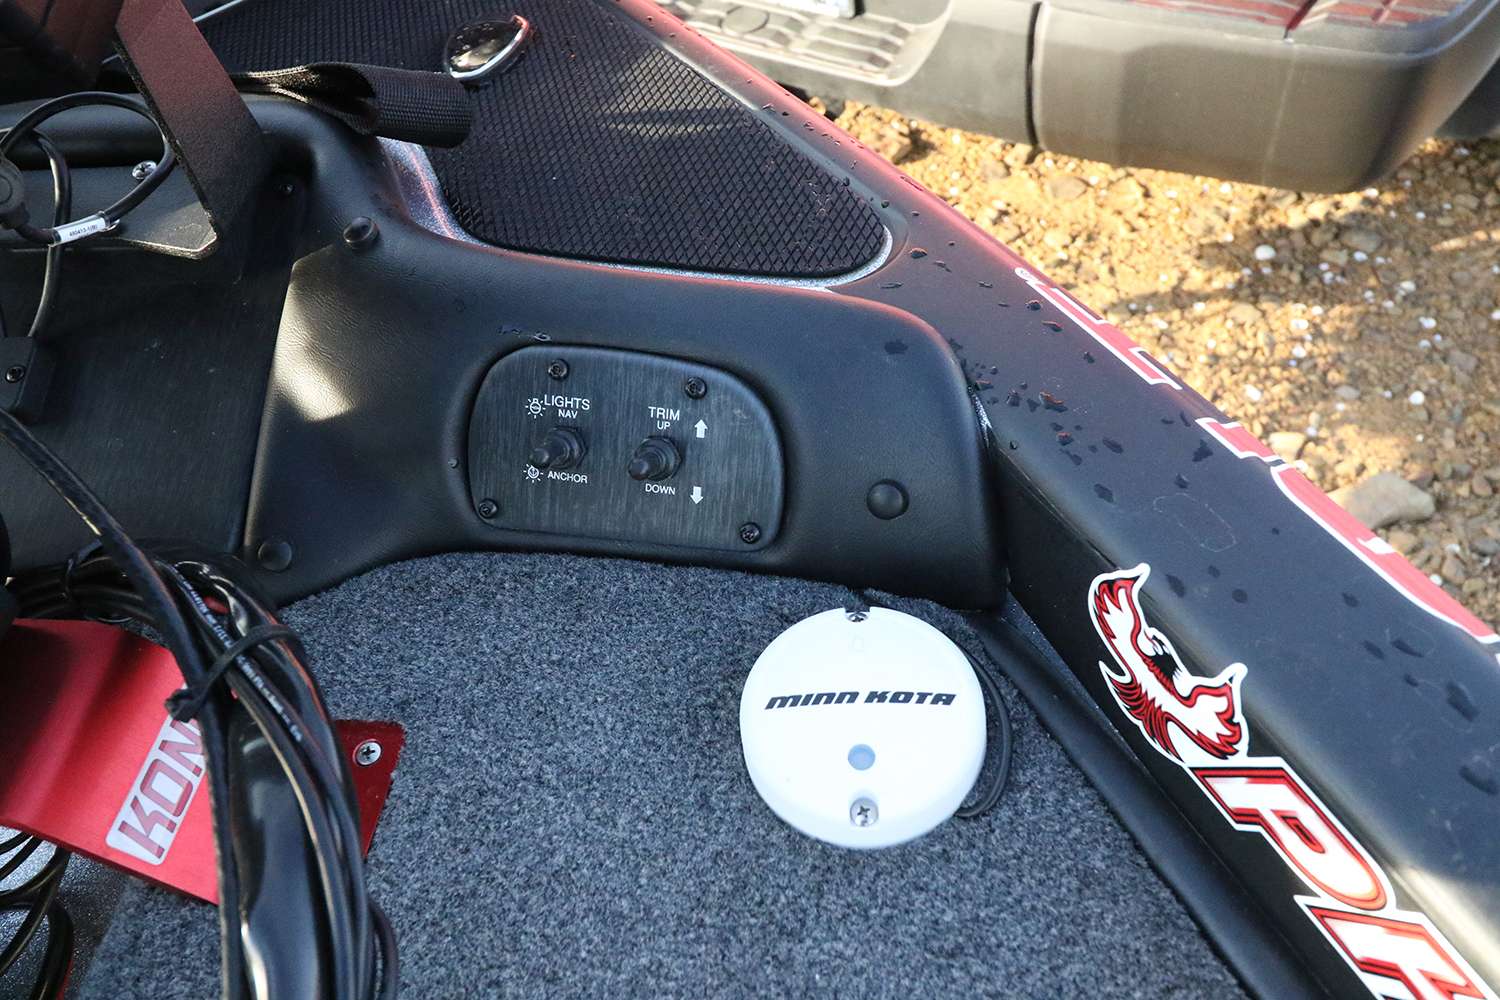 Opposite the Hydrowave is the Minn Kota GPS puck, and front end trim controls for his Yamaha SHO.